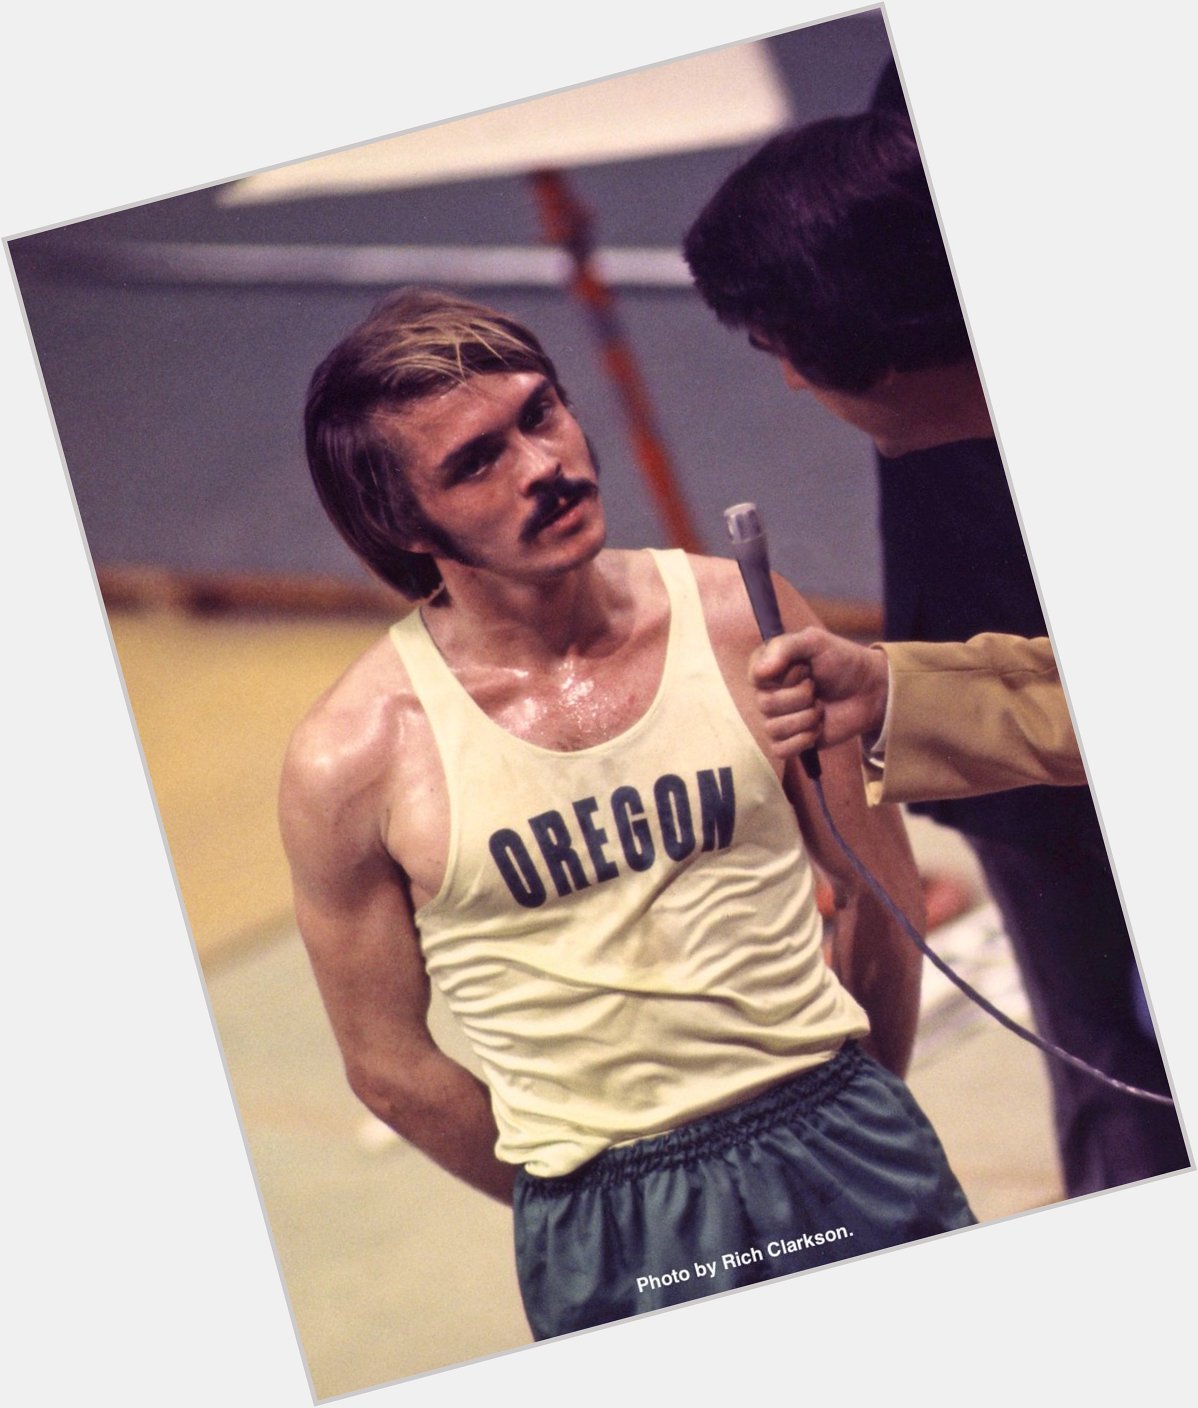 Today would have been Steve Prefontaine\s 68th birthday.

Happy Birthday, Pre  